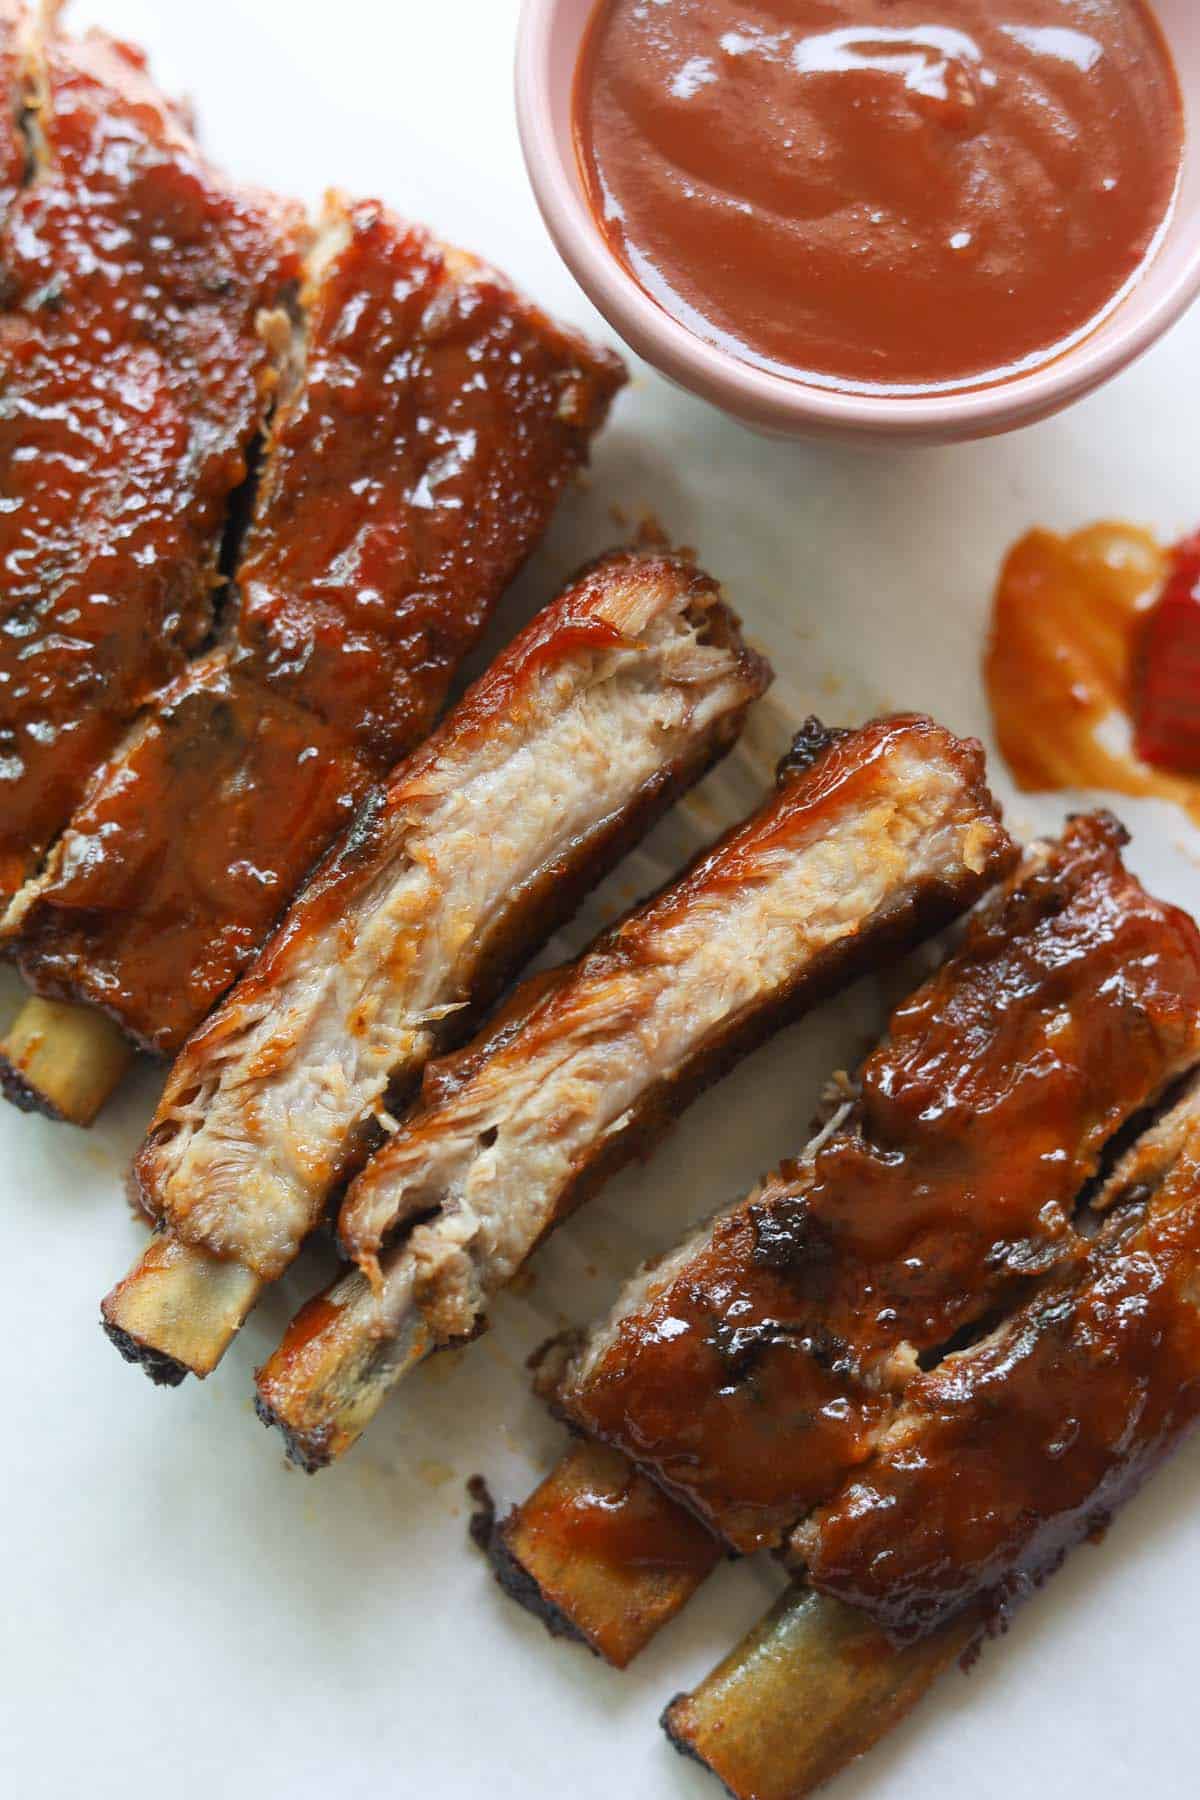 Ribs on parchment paper